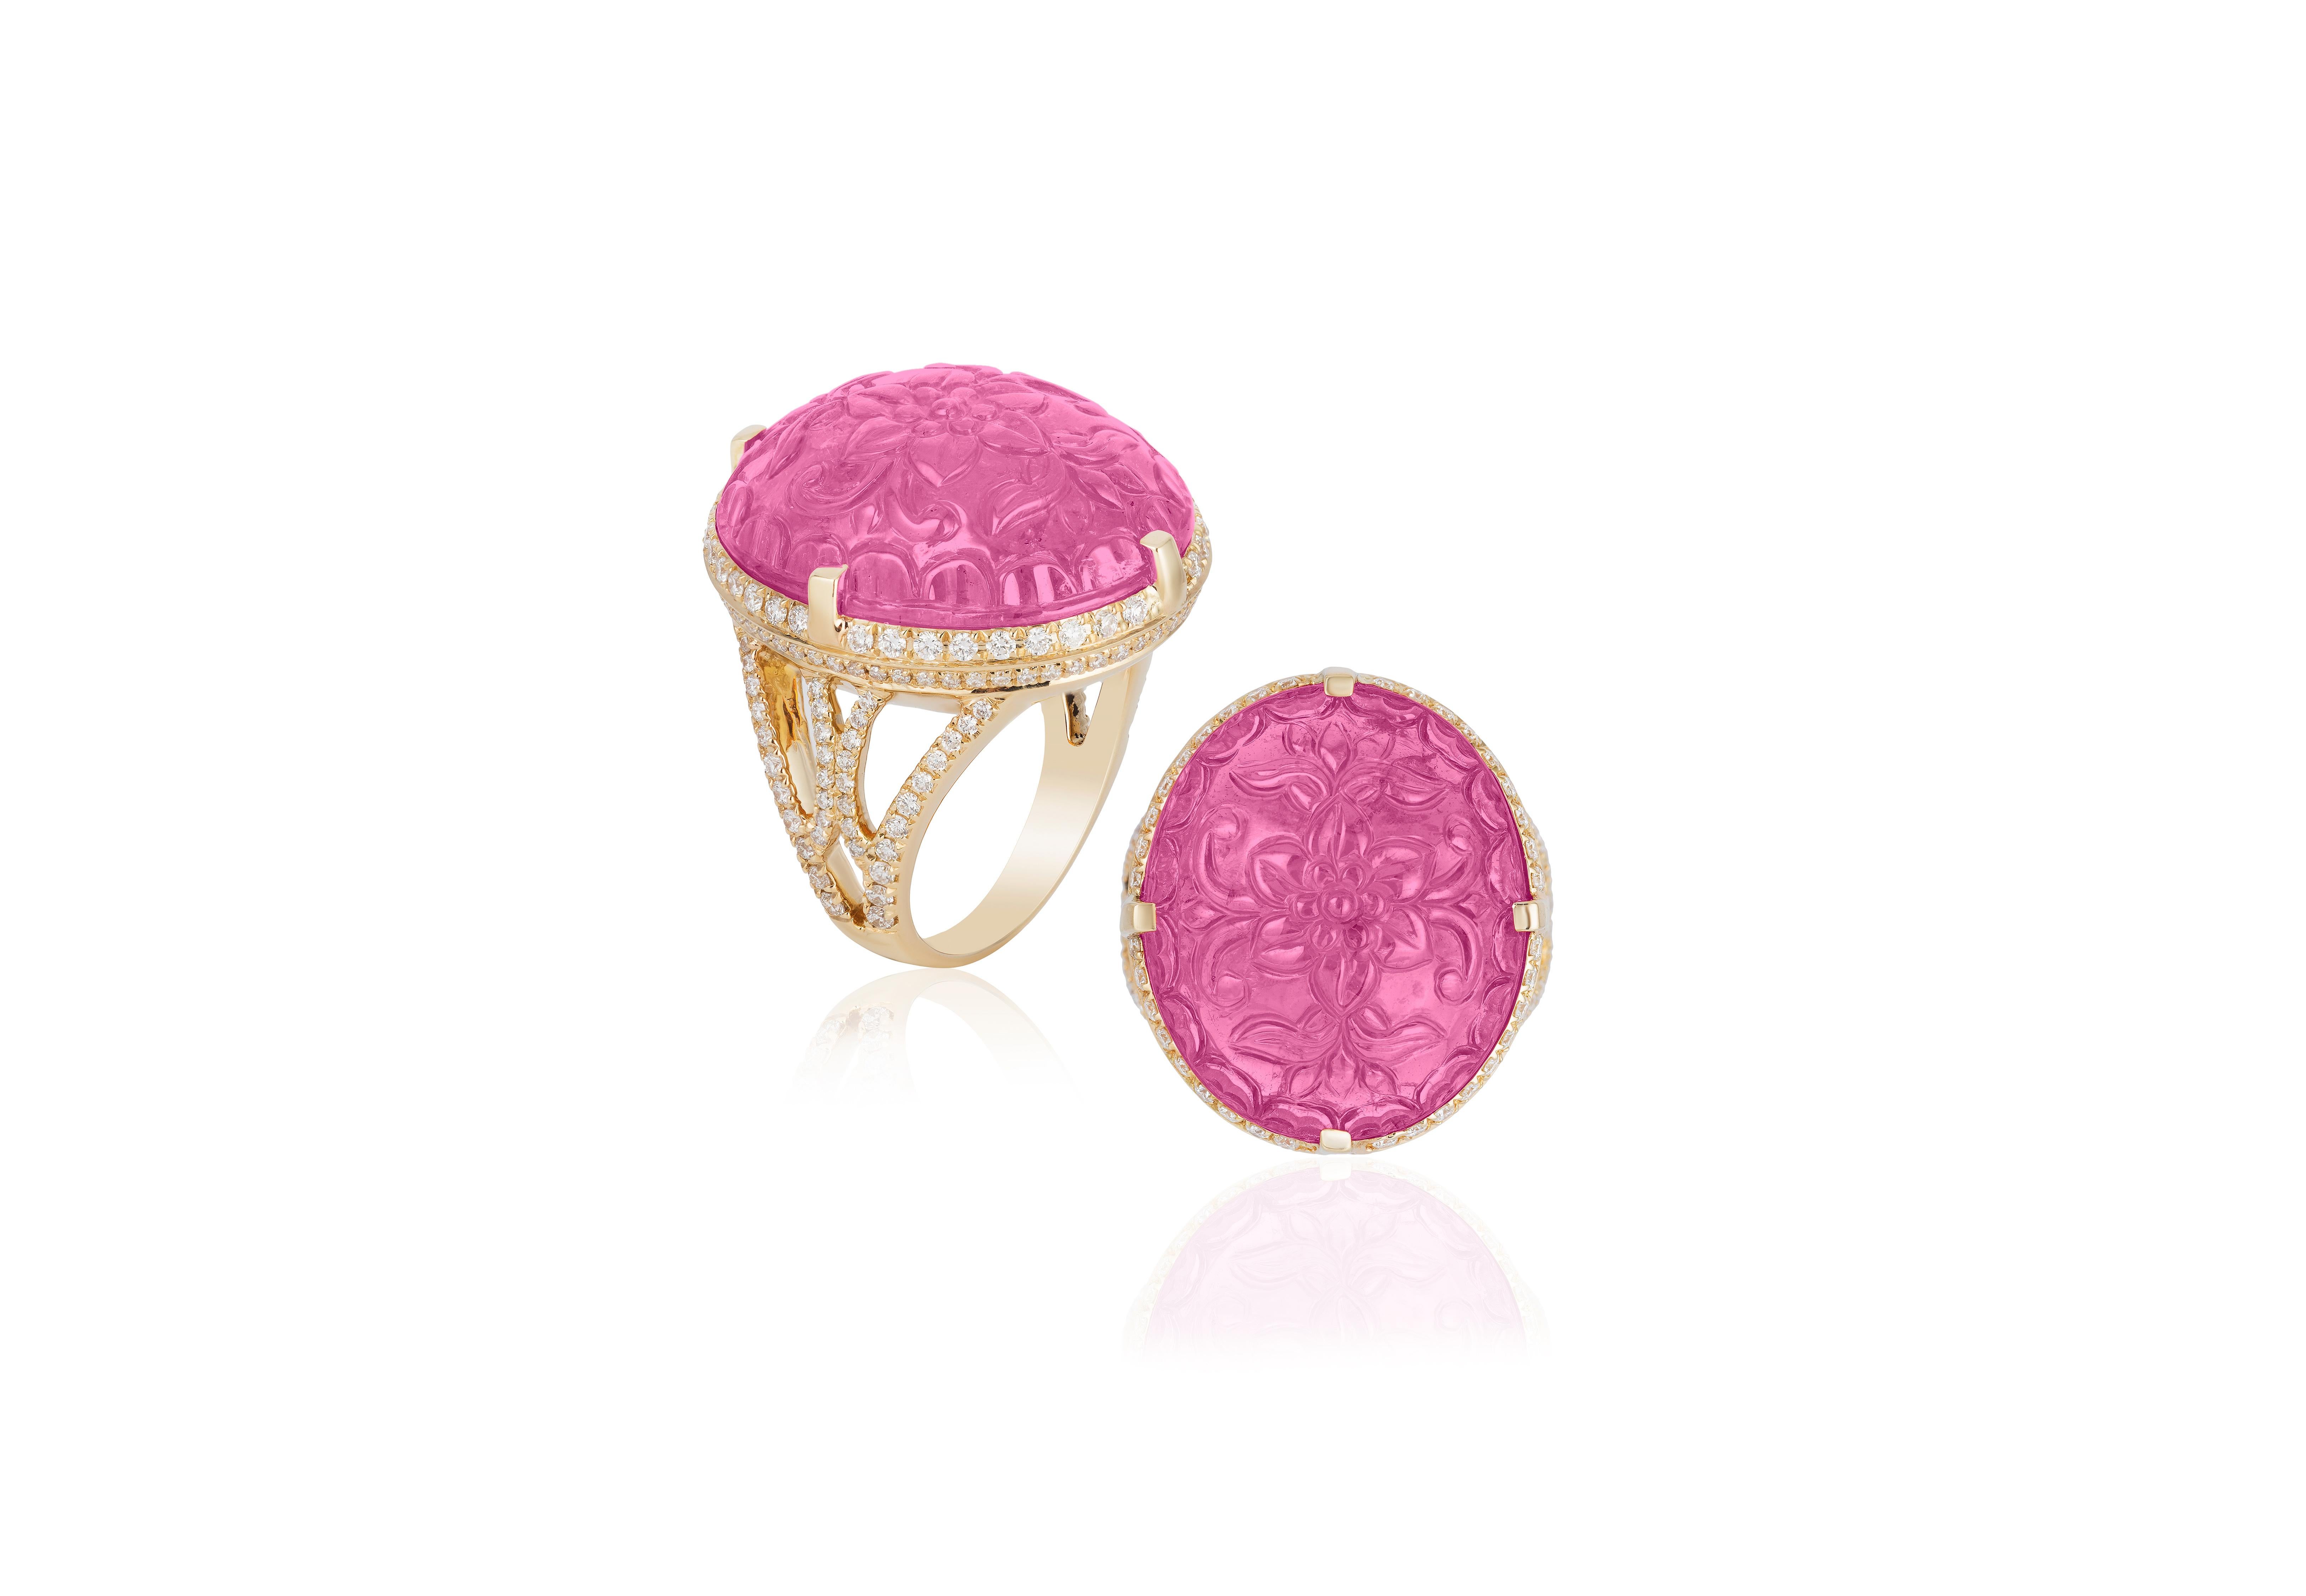 This is a unique Carved Pink Tourmaline Oval Shape Ring set in 18K Yellow Gold, from 'G-One' Collection. A ring that you can use to dazzle on any occasion. If you want to make an statement, this is the perfect piece to do it!

* Gemstone: 100% Earth